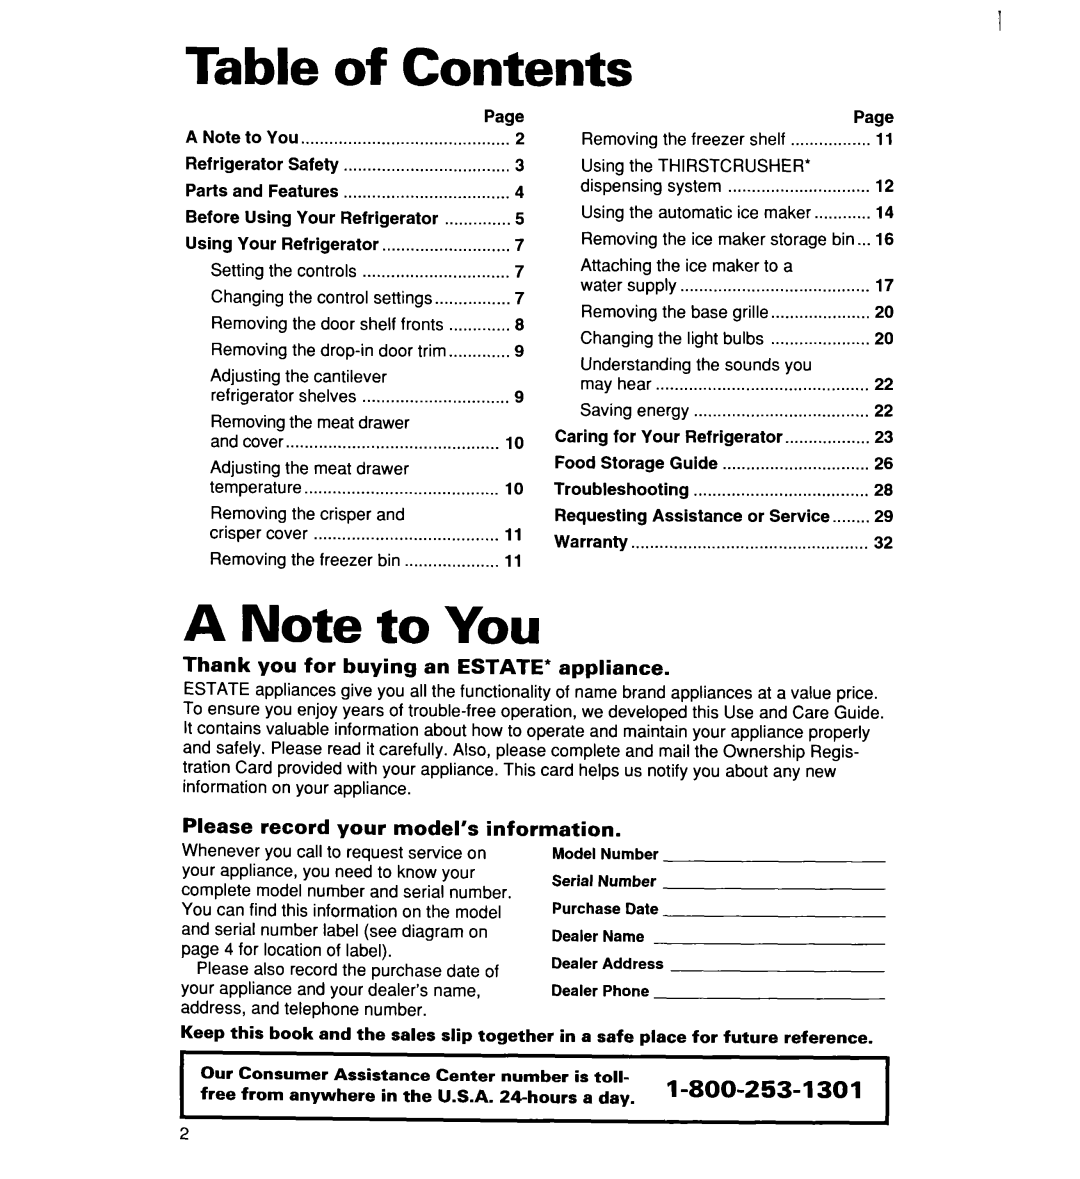 Whirlpool 2194182 warranty Table, Contents, A Note to You, Thank you for buying an ESTATE* appliance, 1-800-253-1301 